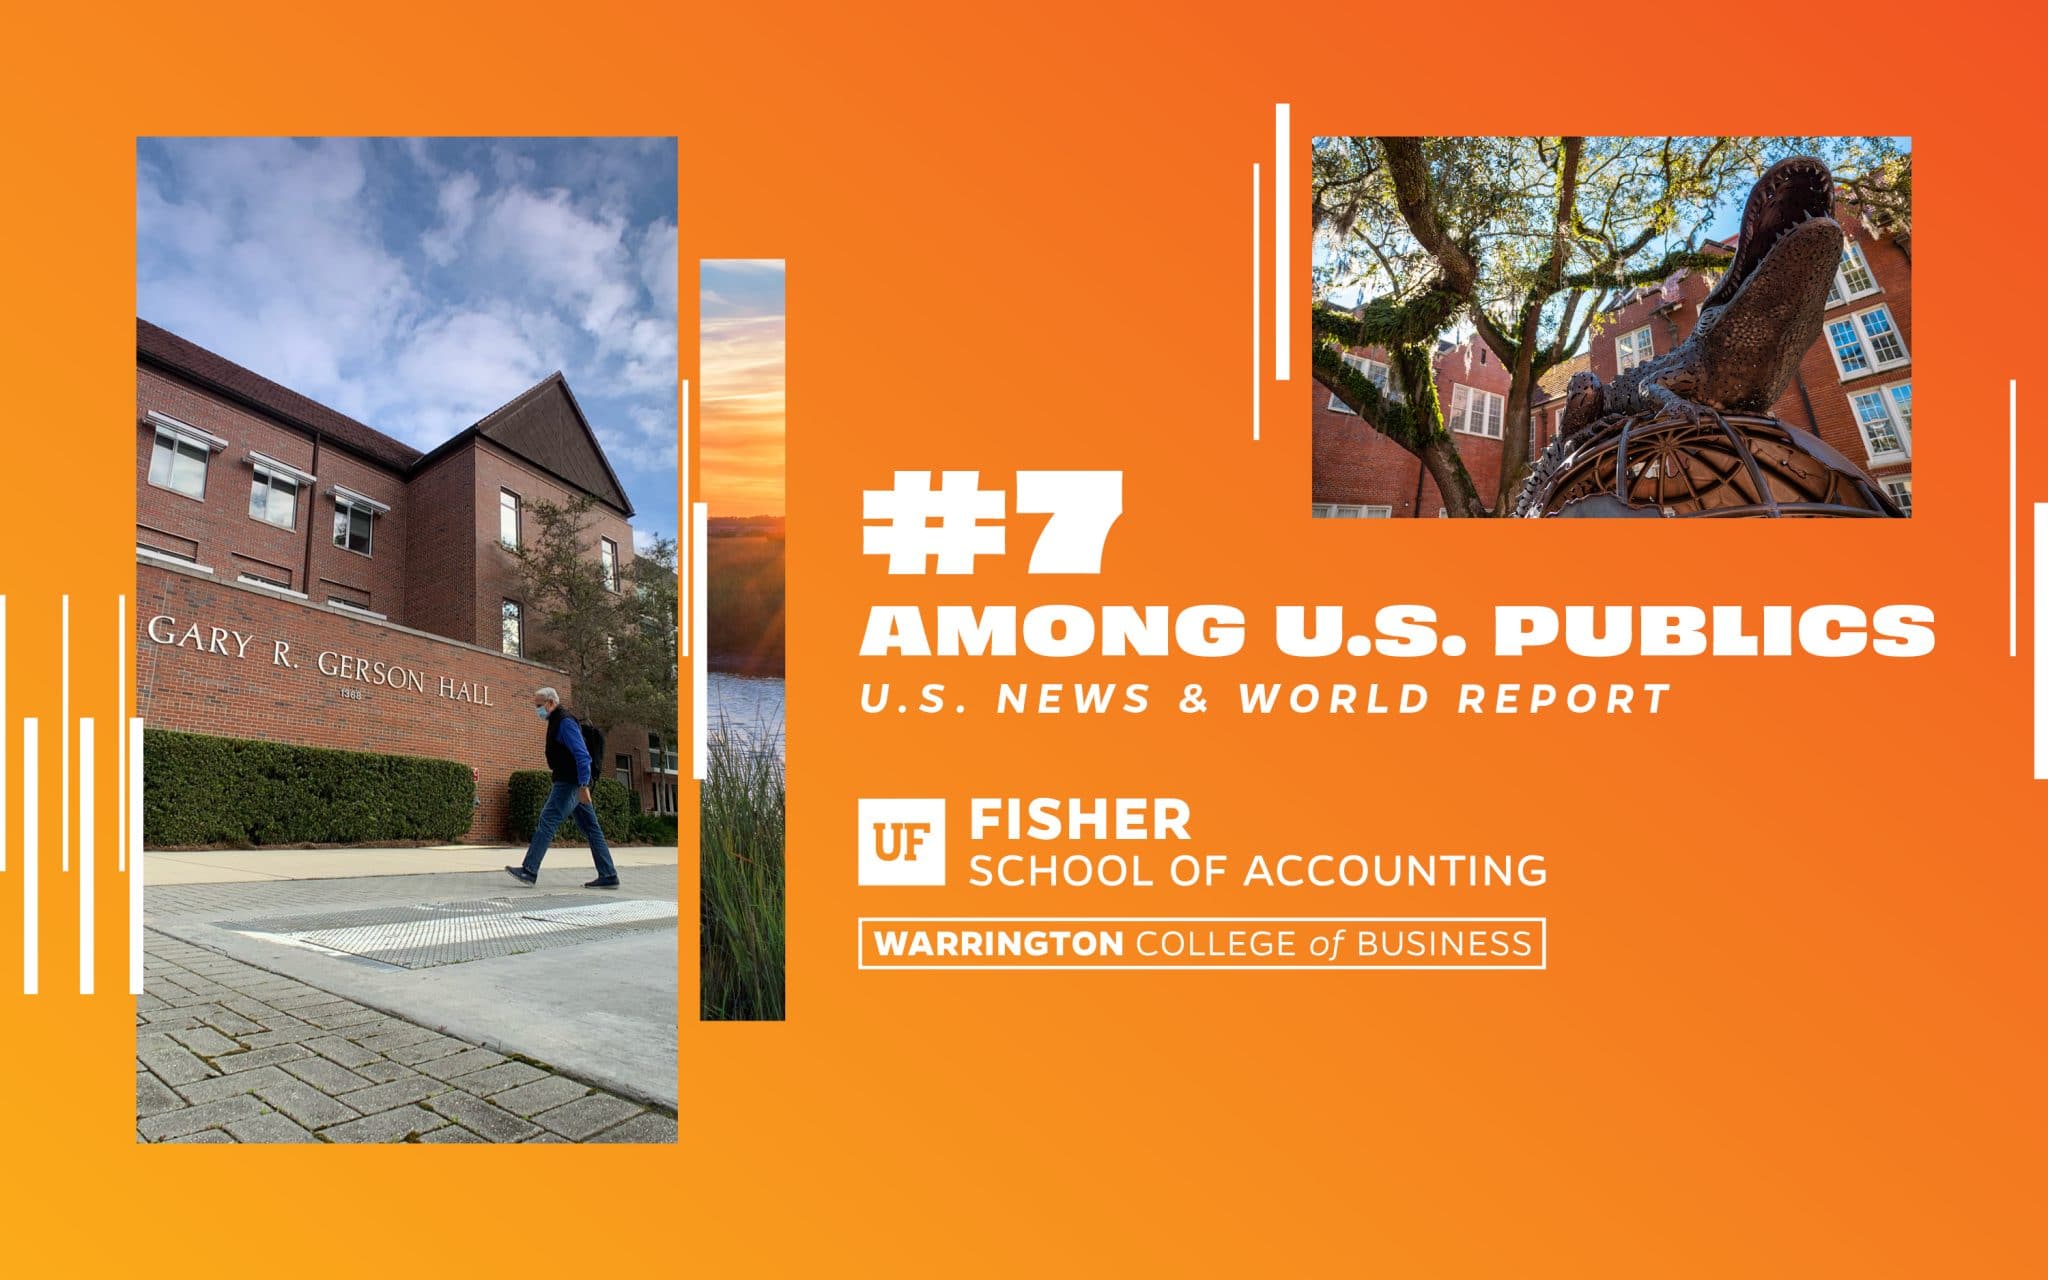 Fisher School remains among the top 10 best public undergraduate